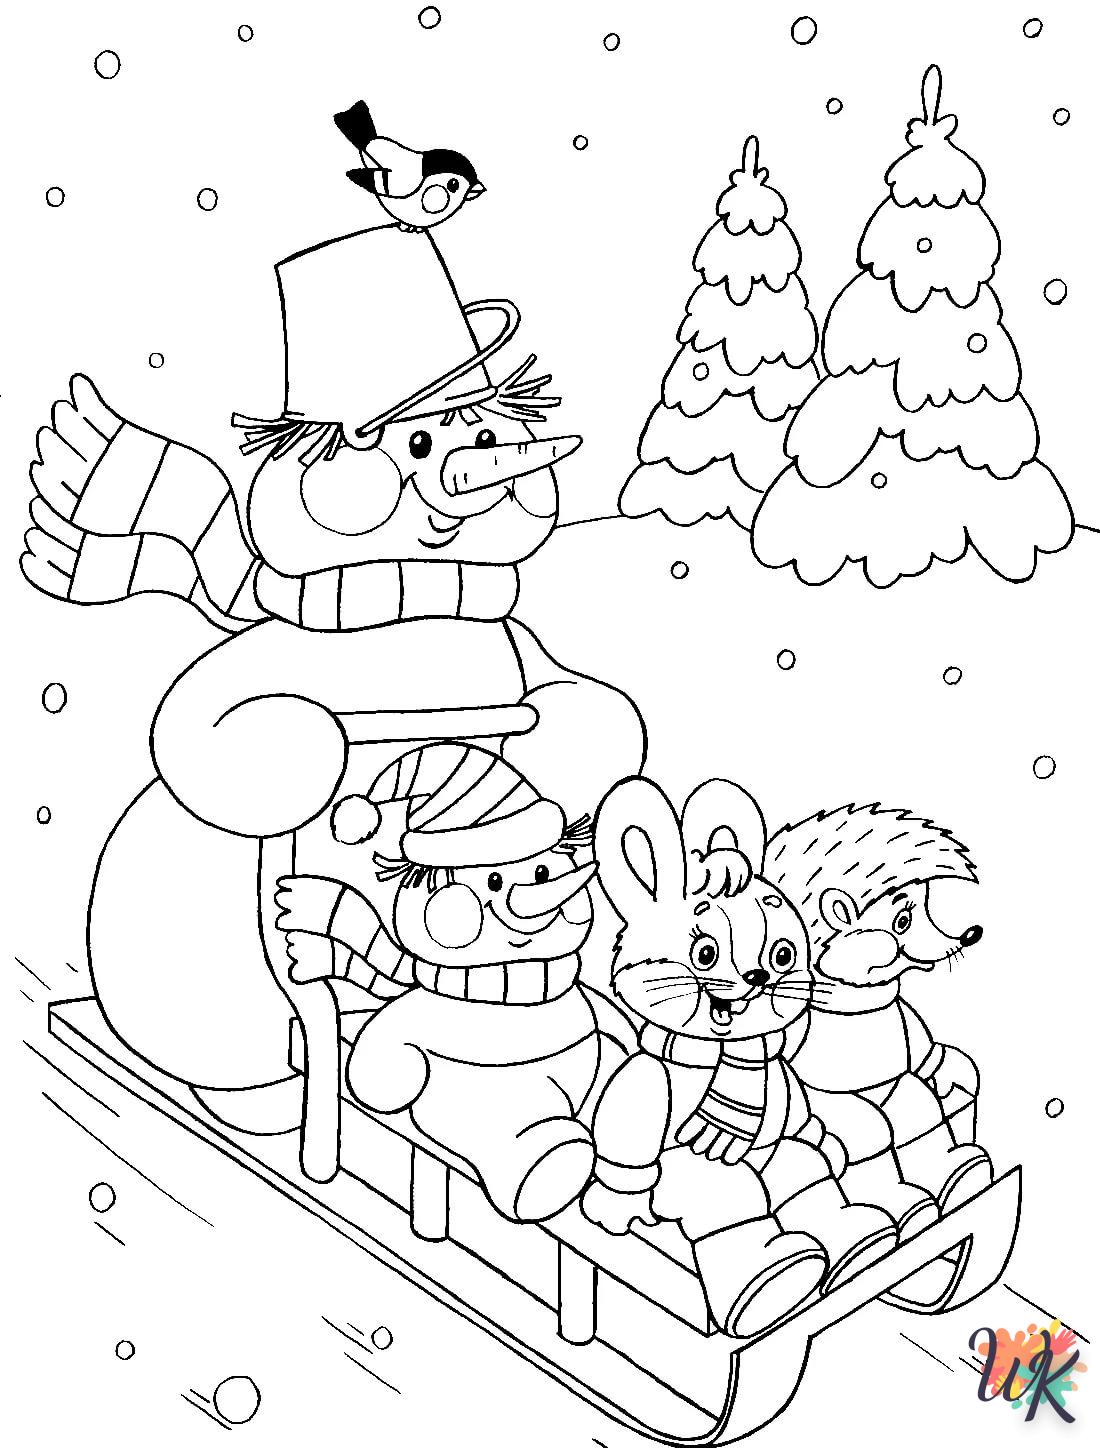 Snowman coloring page for baby to print